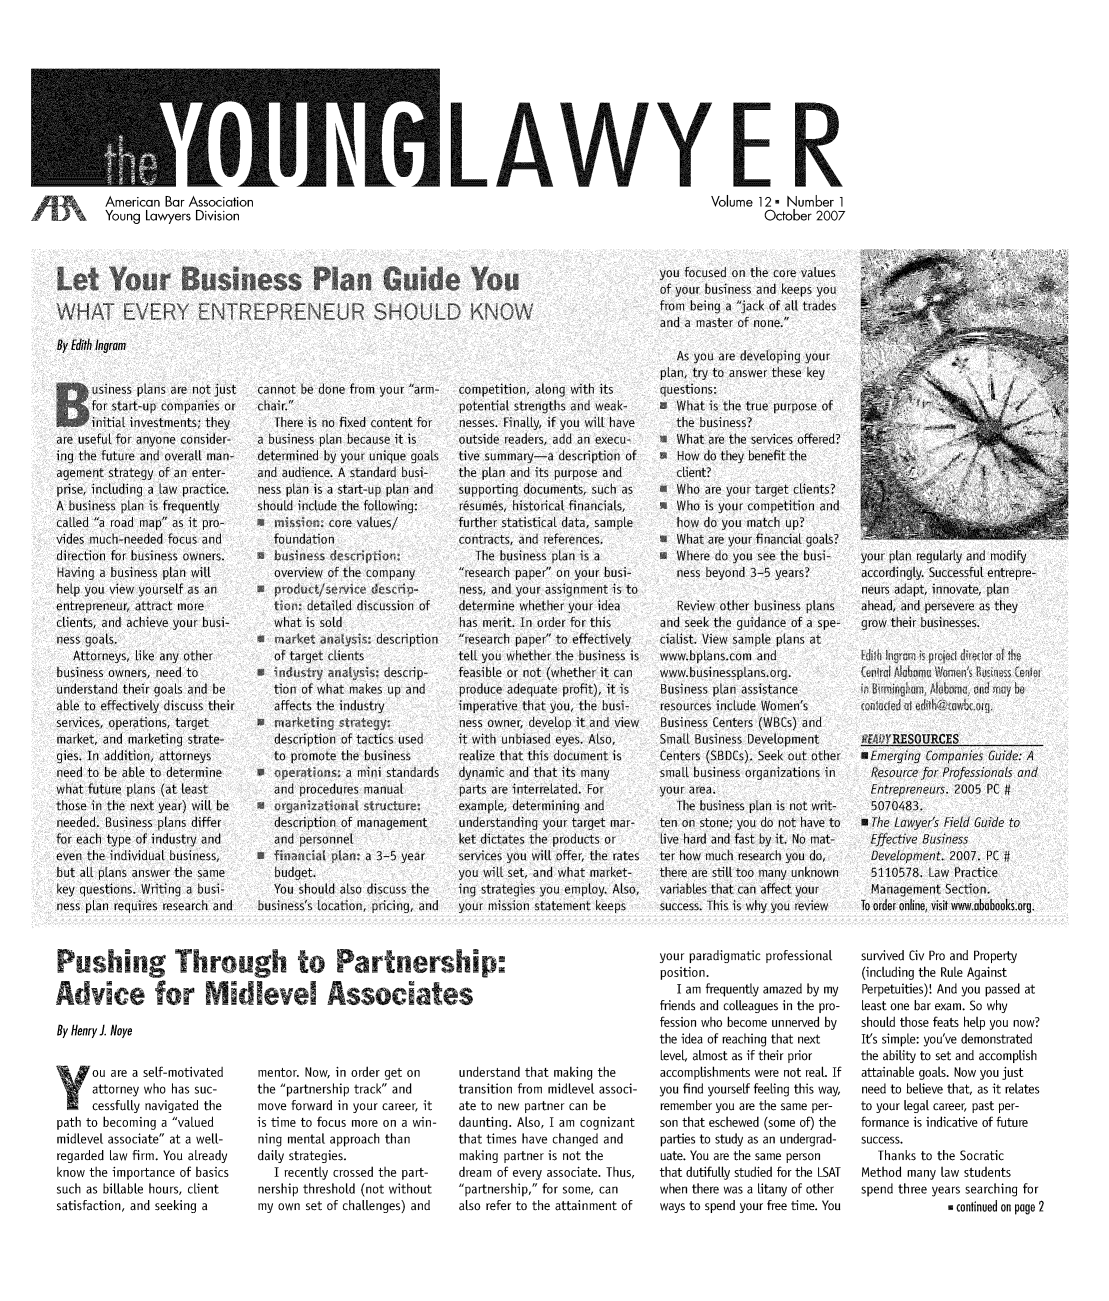 handle is hein.journals/yglwyr12 and id is 1 raw text is: LAWY E R
Volume 12, Number 1
October 2007

ushig Through to Partnership:
Advice for Midlevel Associates
By Henry J. Noye

ou are a self-motivated
attorney who has suc-
cessfuLLy navigated the
path to becoming a valued
midlevel associate at a well-
regarded law firm. You already
know the importance of basics
such as billable hours, client
satisfaction, and seeking a

mentor. Now, in order get on
the partnership track and
move forward in your career, it
is time to focus more on a win-
ning mental approach than
daily strategies.
I recently crossed the part-
nership threshold (not without
my own set of challenges) and

understand that making the
transition from midlevel associ-
ate to new partner can be
daunting. Also, I am cognizant
that times have changed and
making partner is not the
dream of every associate. Thus,
'partnership, for some, can
also refer to the attainment of

your paradigmatic professional
position.
I am frequently amazed by my
friends and colleagues in the pro-
fession who become unnerved by
the idea of reaching that next
Level, almost as if their prior
accomplishments were not real If
you find yourself feeling this way,
remember you are the same per-
son that eschewed (some of) the
parties to study as an undergrad-
uate. You are the same person
that dutifully studied for the LSAT
when there was a Litany of other

survived Civ Pro and Property
(including the Rule Against
Perpetuities)! And you passed at
least one bar exam. So why
should those feats help you now?
It's simple: you've demonstrated
the ability to set and accomplish
attainable goals. Now you just
need to believe that, as it relates
to your Legal career, past per-
formance is indicative of future
success.
Thanks to the Socratic
Method many Law students
spend three years searching for

ways to spend your free time. You                 m continued on page 2


